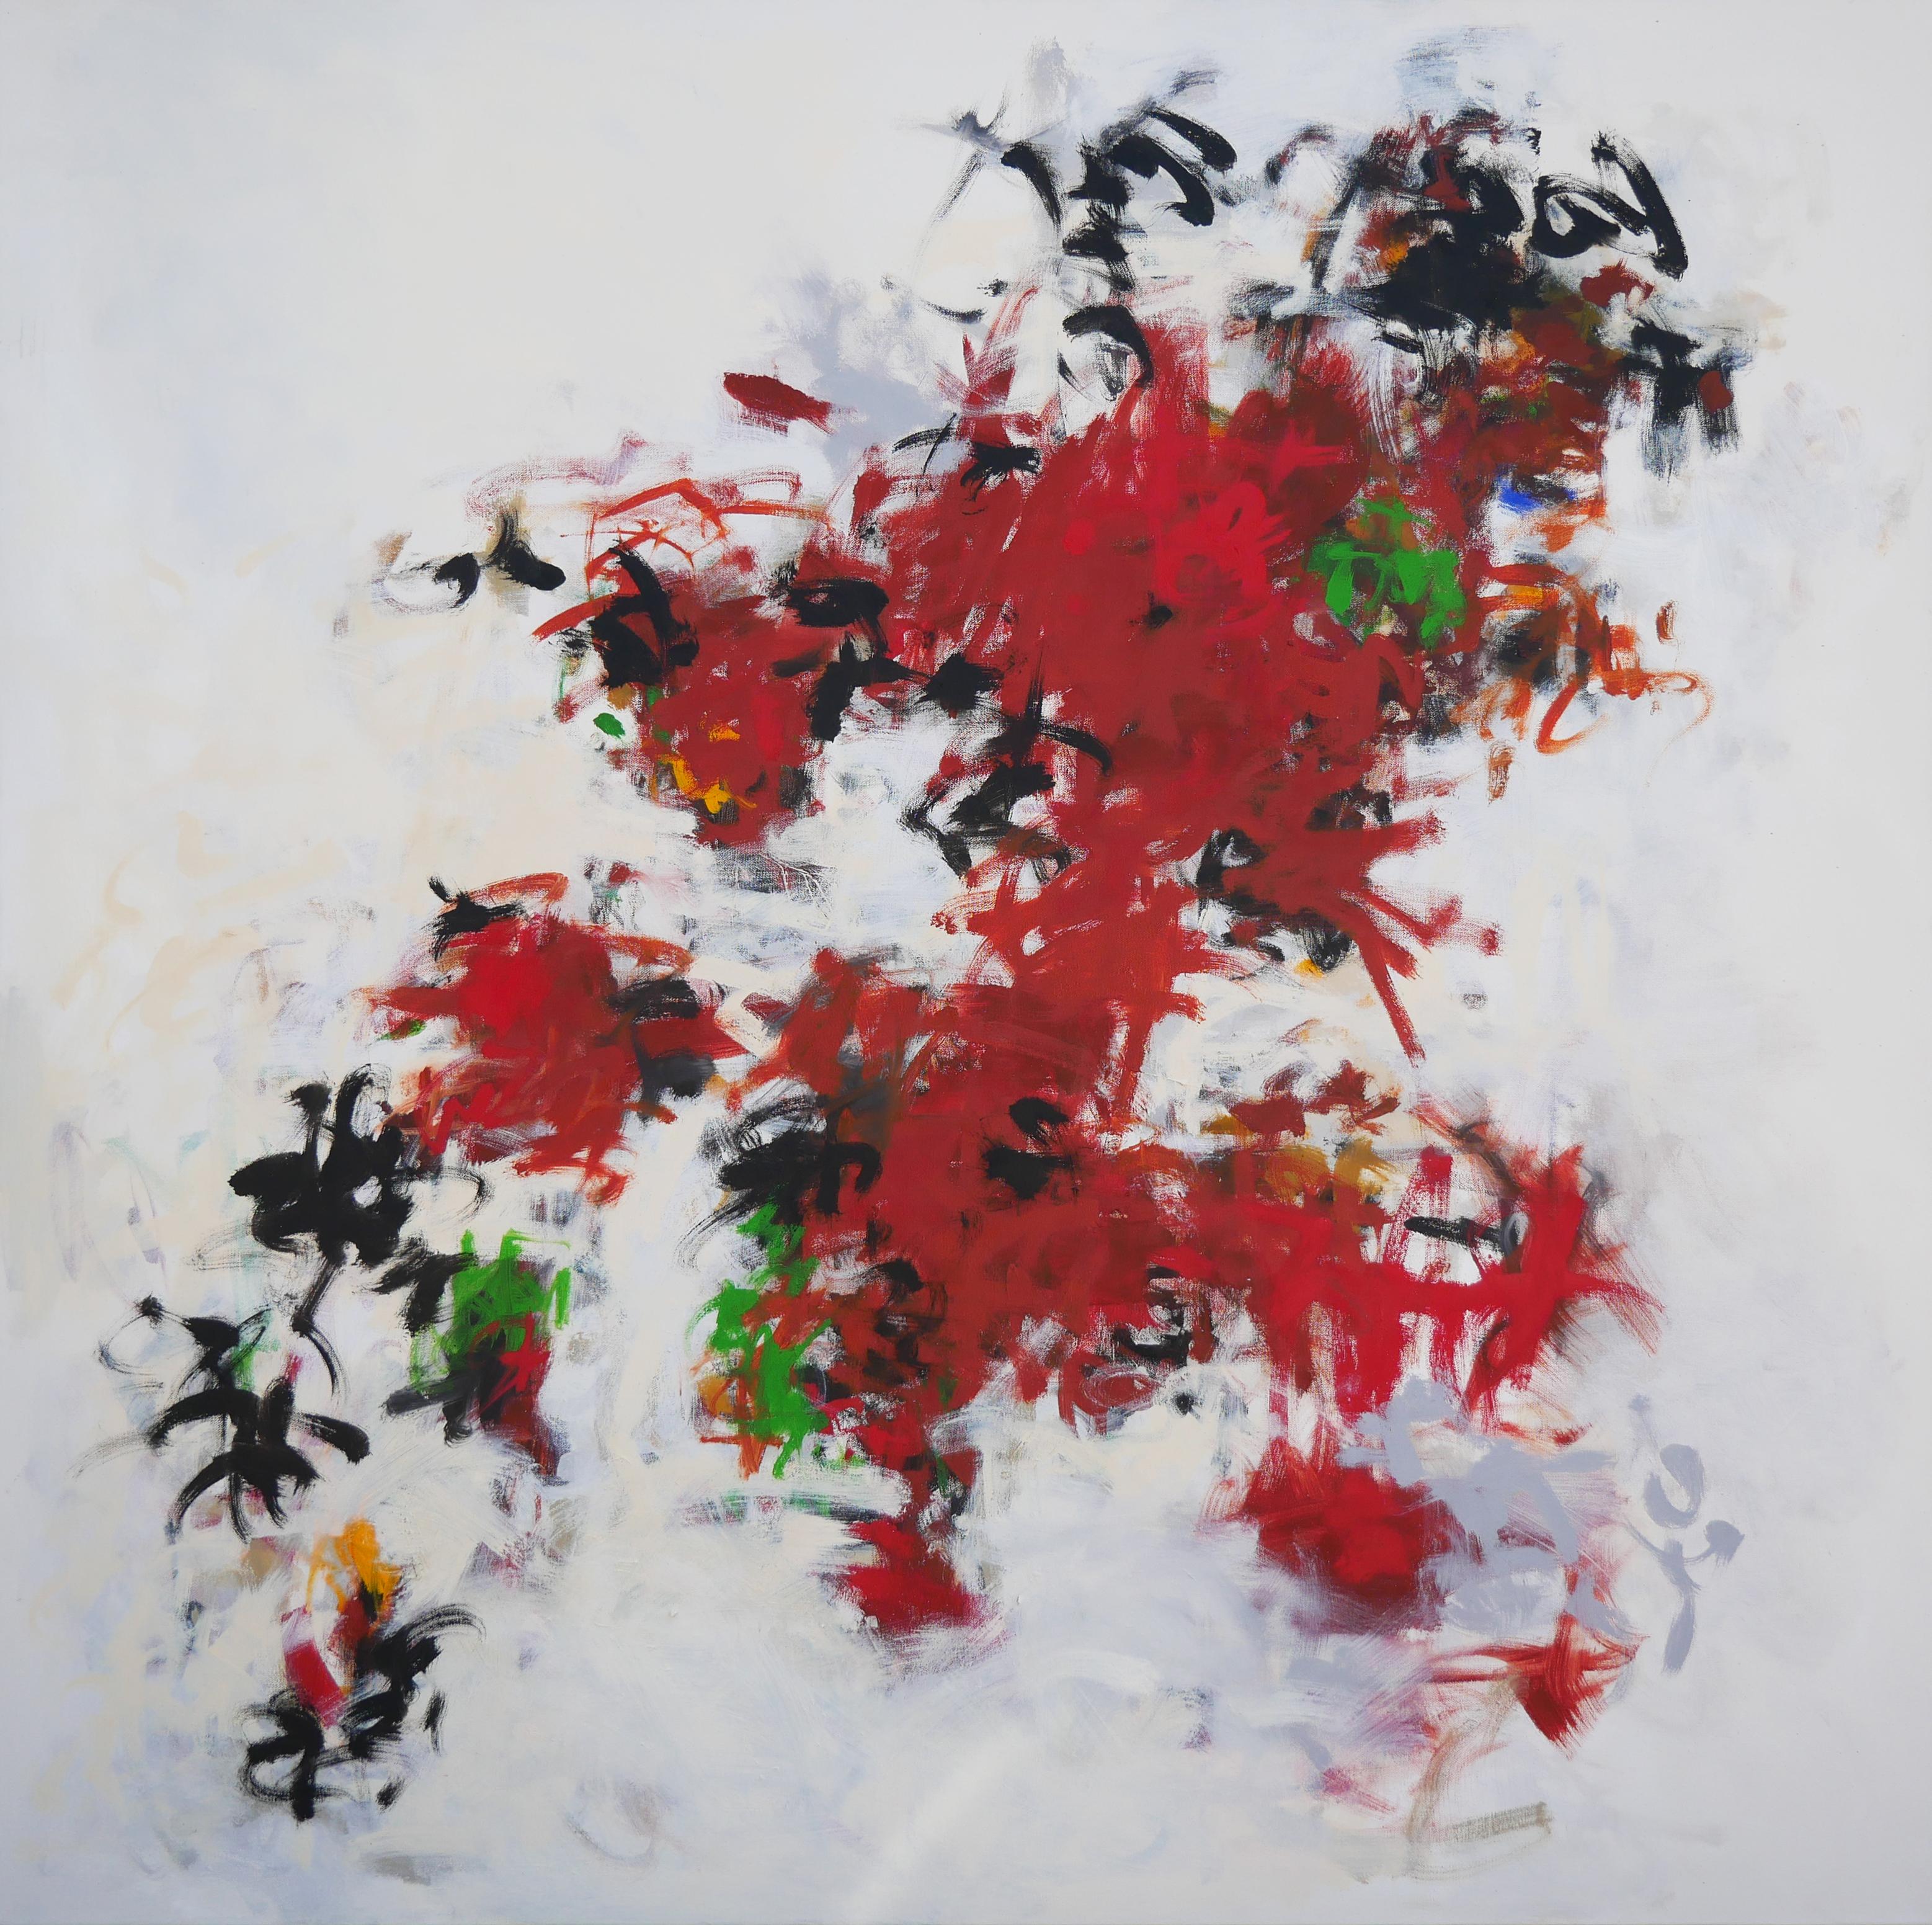 Gerald Syler Abstract Painting - "Untitled 80" Large Red, Black, and Green Abstract Expressionist Painting